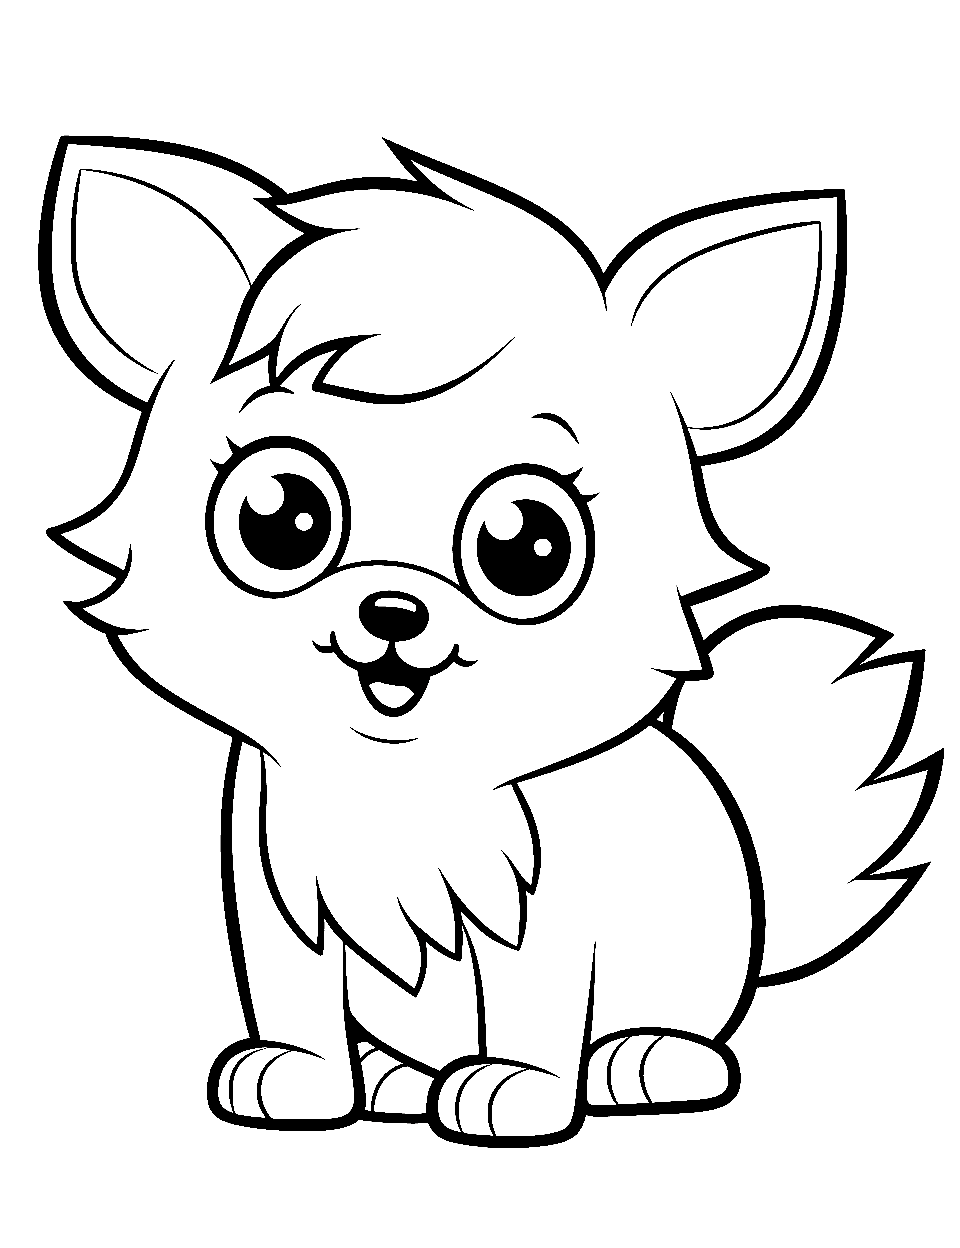 Anime Animal Coloring Page - A cute anime-style animal posing happily.